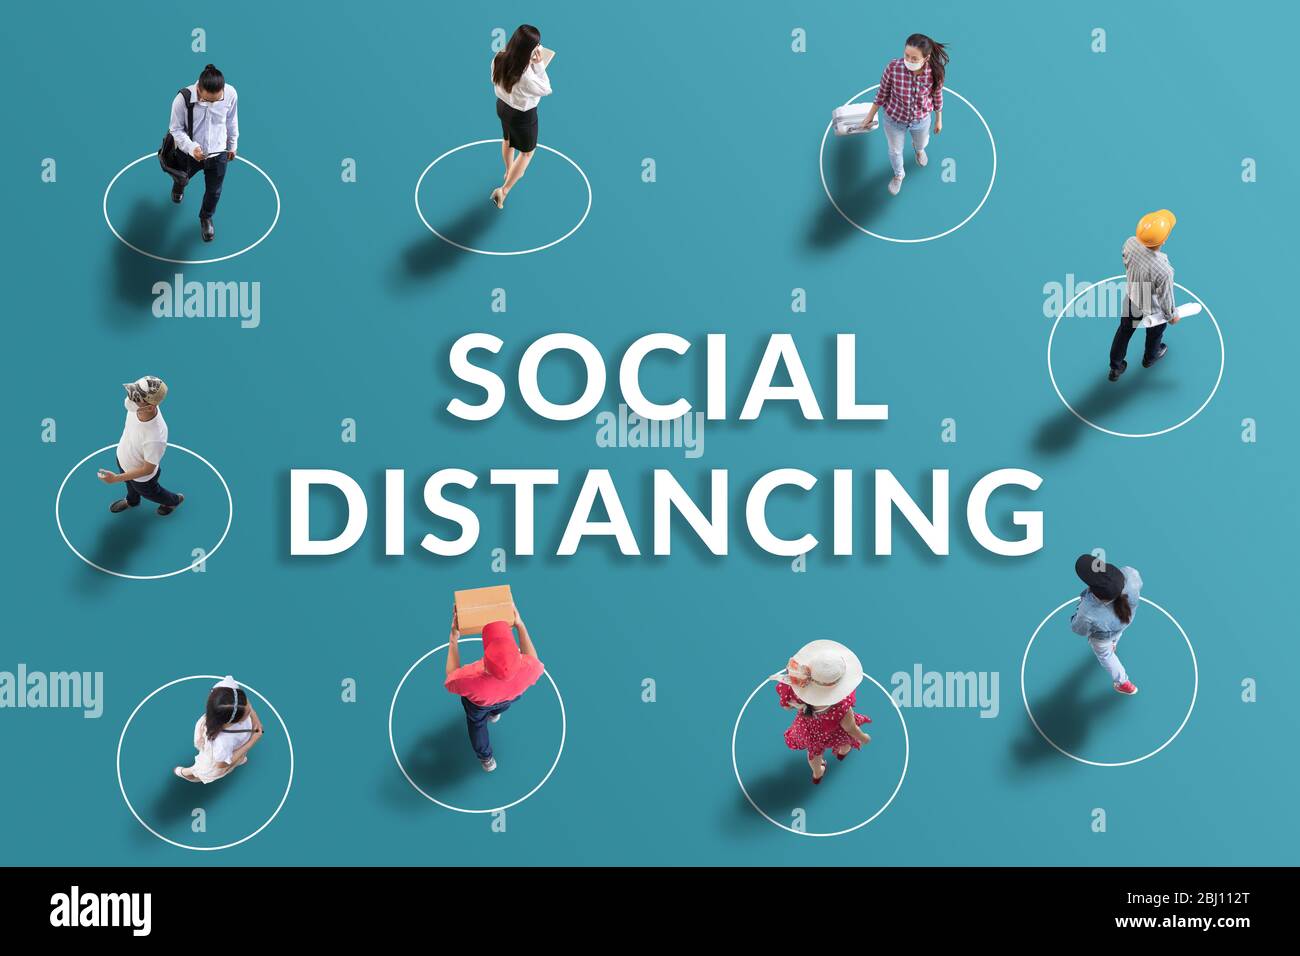 social distancing concept. people keep spaced between each other for social distancing, increasing the physical space between people to avoid spreadin Stock Photo